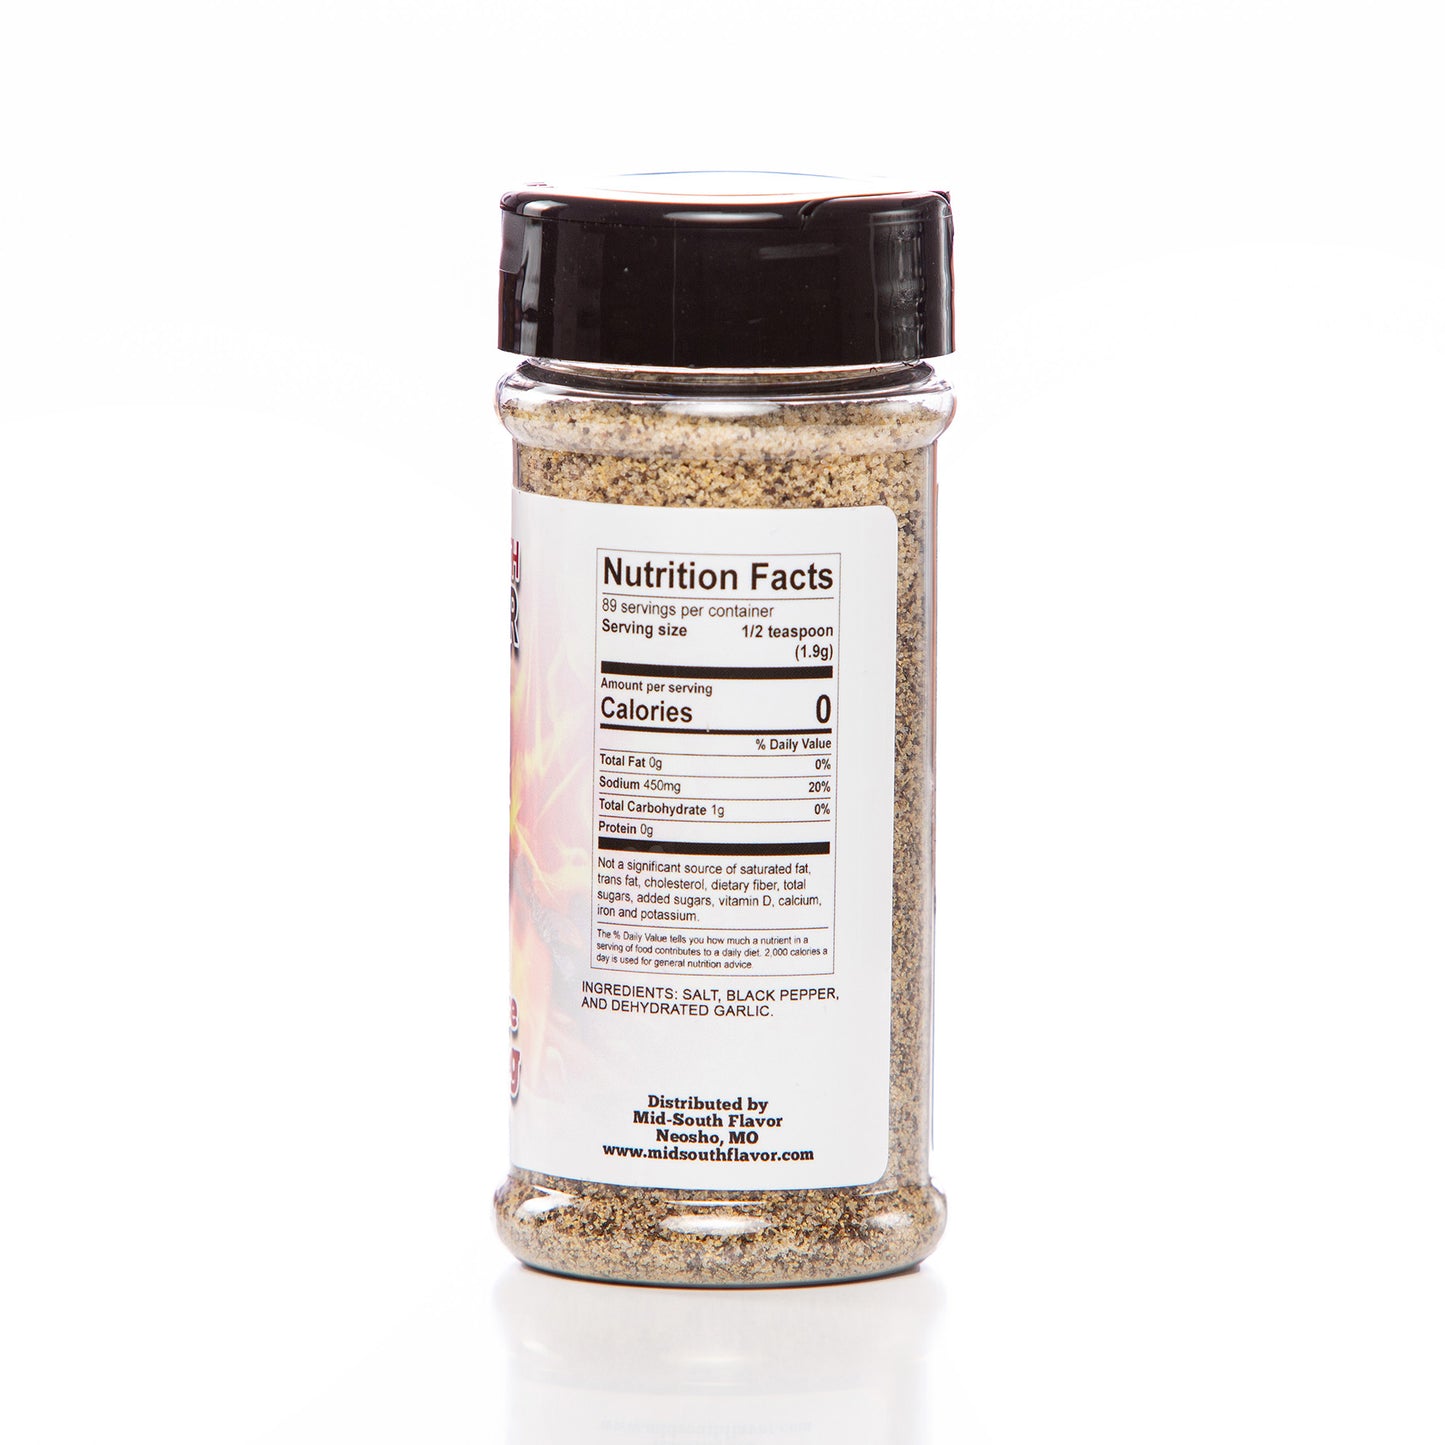 MID-SOUTH FLAVOR SPG All-Purpose Seasoning, 6 oz Bottle of Seasoning for Use Indoor and Outdoor Grilling